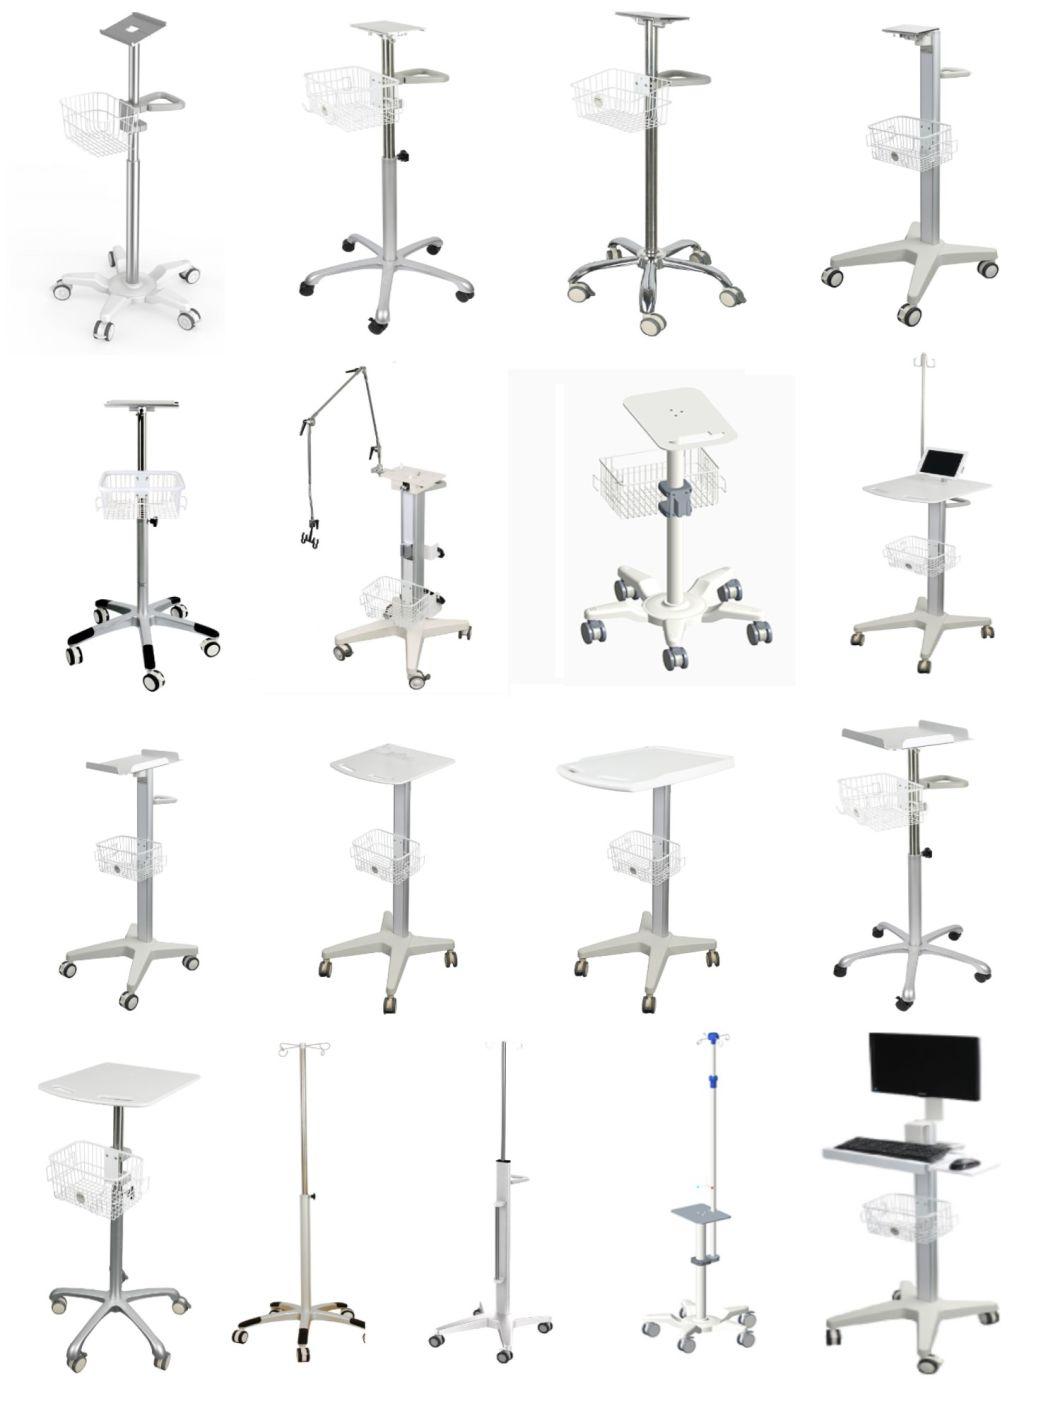 Mobile Syringe Pump/Infusion Pump Trolley